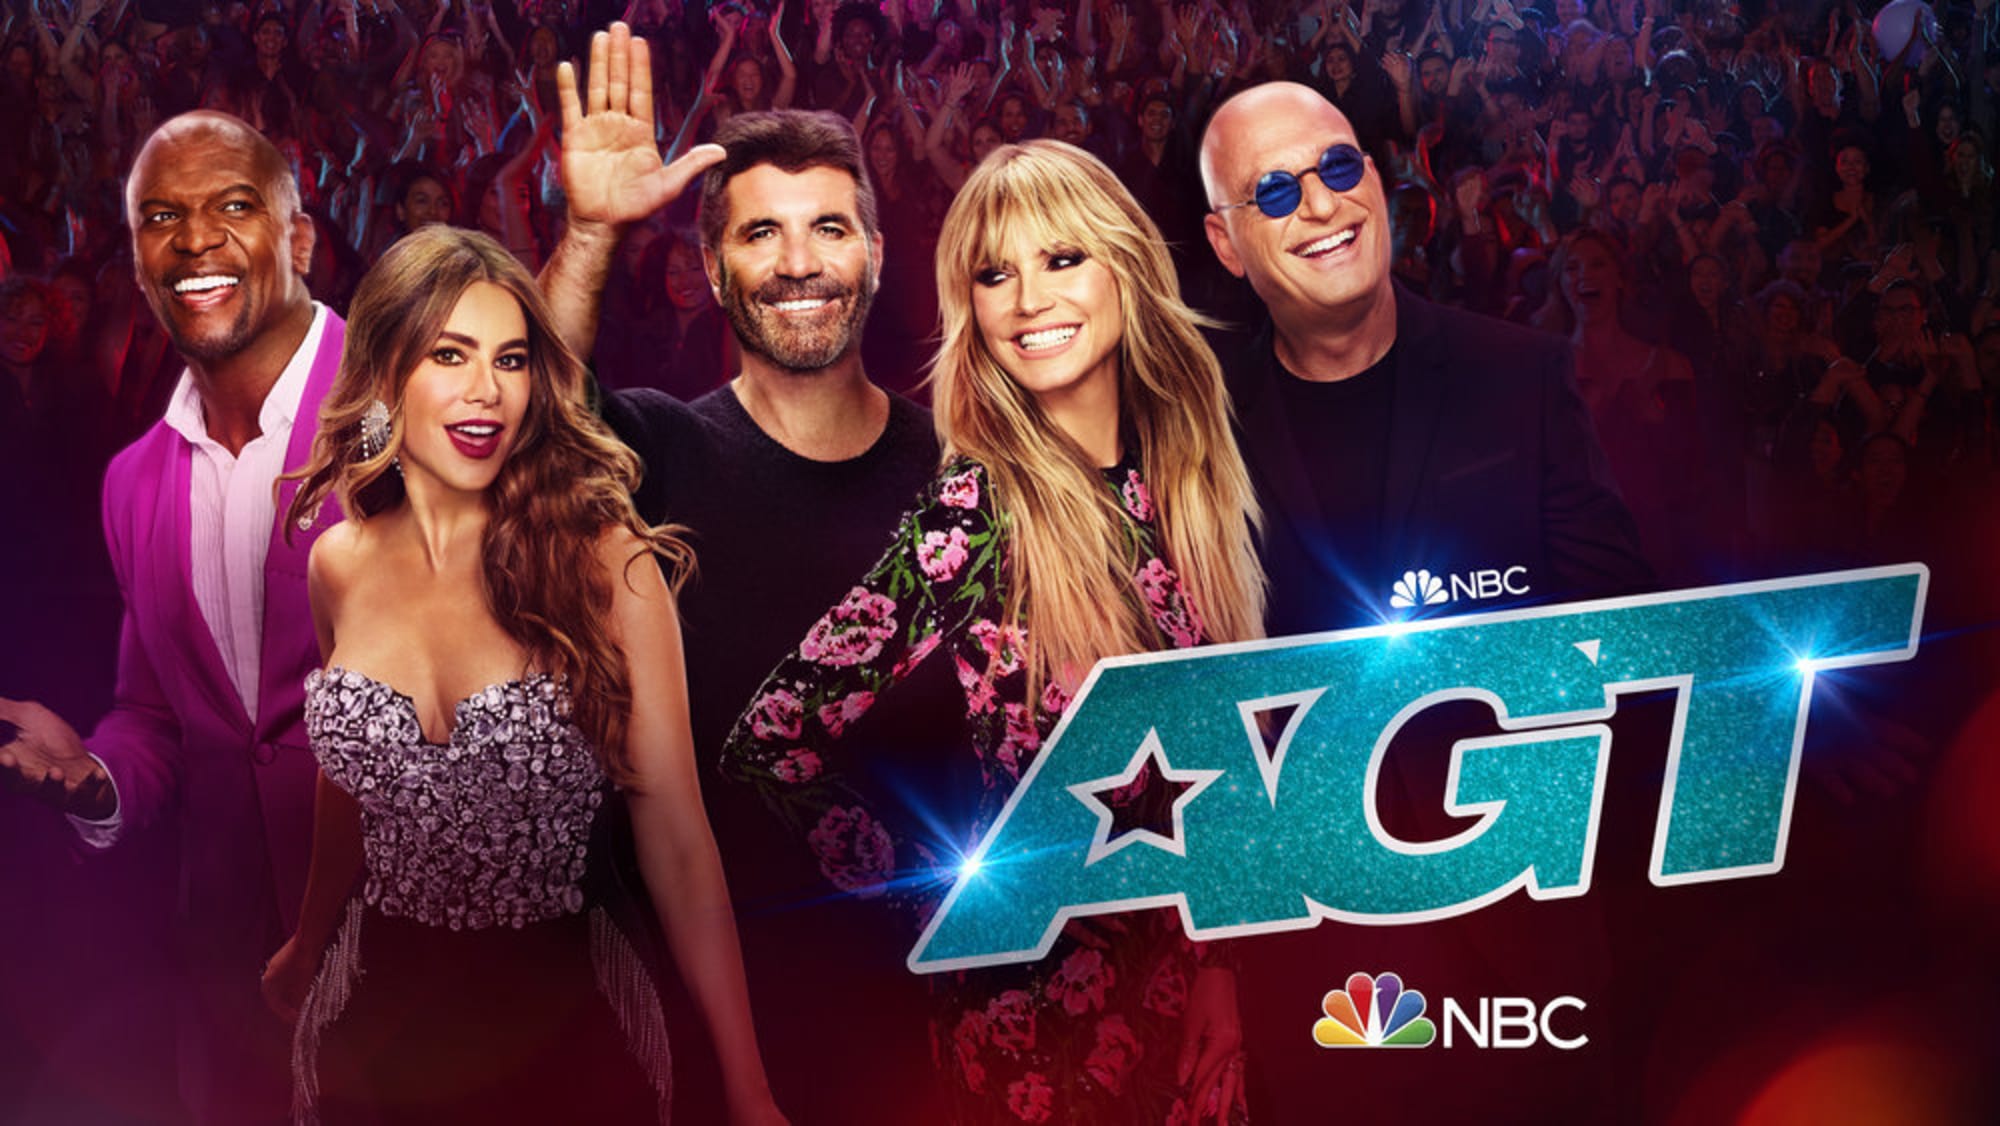 America's Got Talent 2023 release schedule: When do new episodes come out?